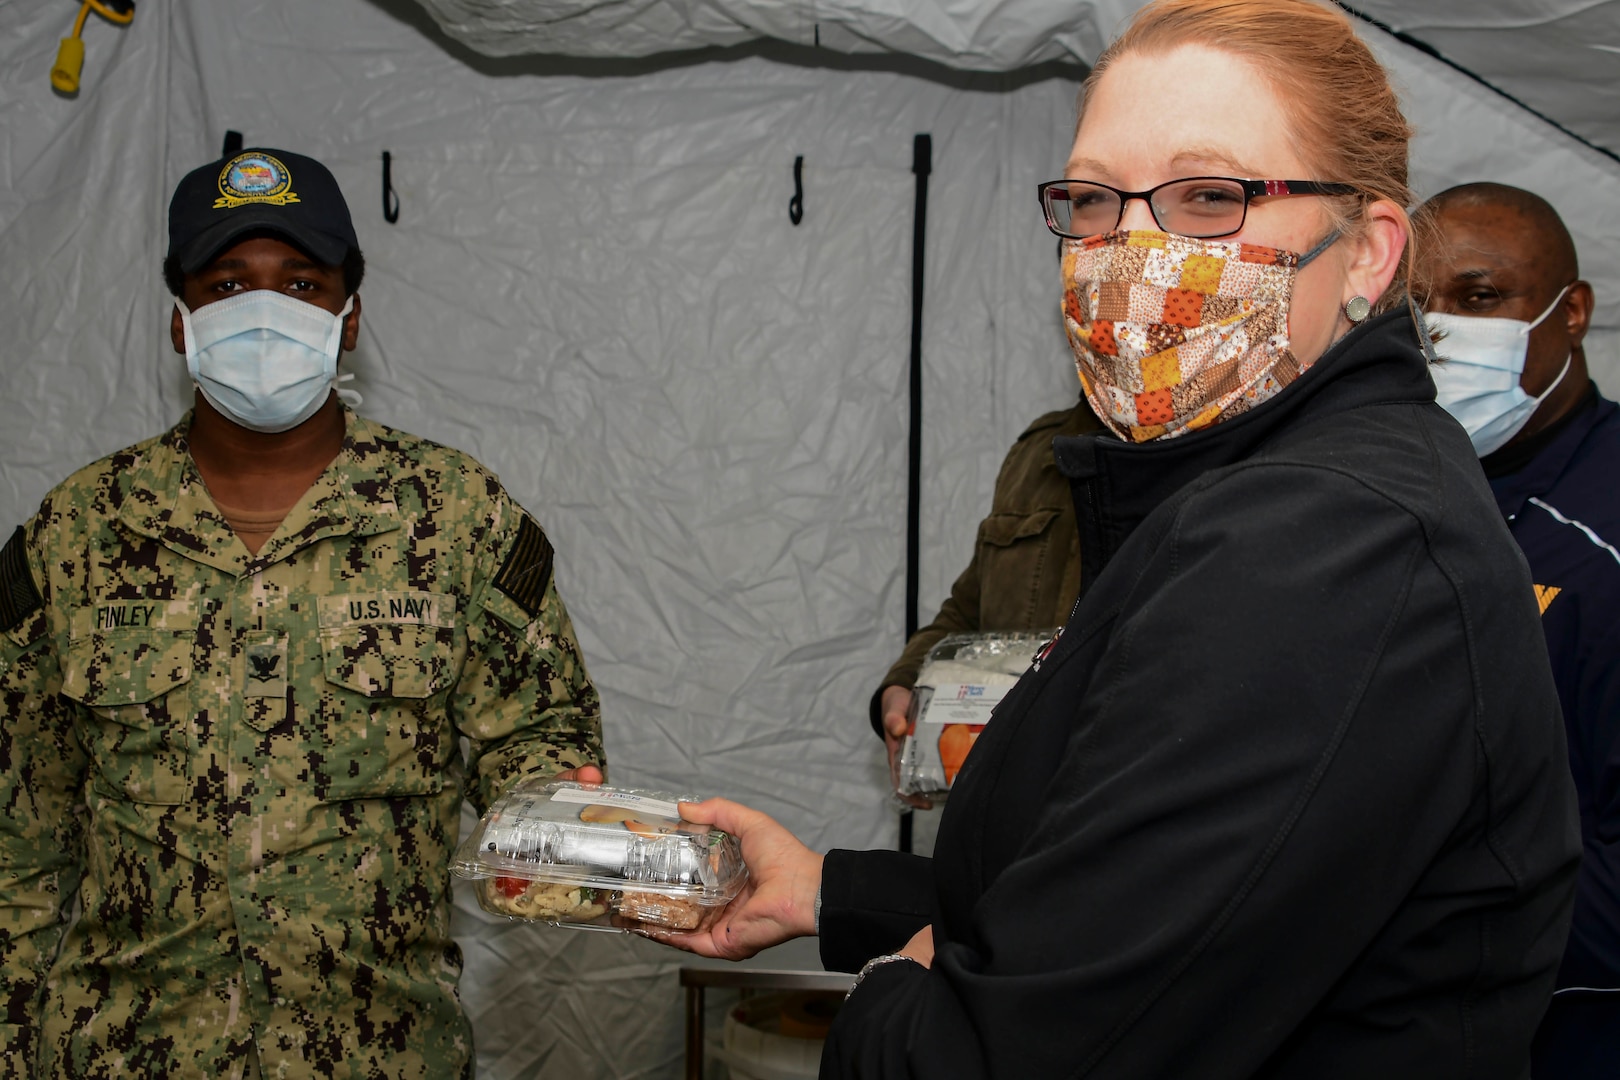 PORTSMOUTH, Va. (Dec. 29, 2020) Naval Medical Center Portsmouth (NMCP) received a special delivery from Mercy Chefs as they assist in the command’s battle against COVID-19, Dec. 29.